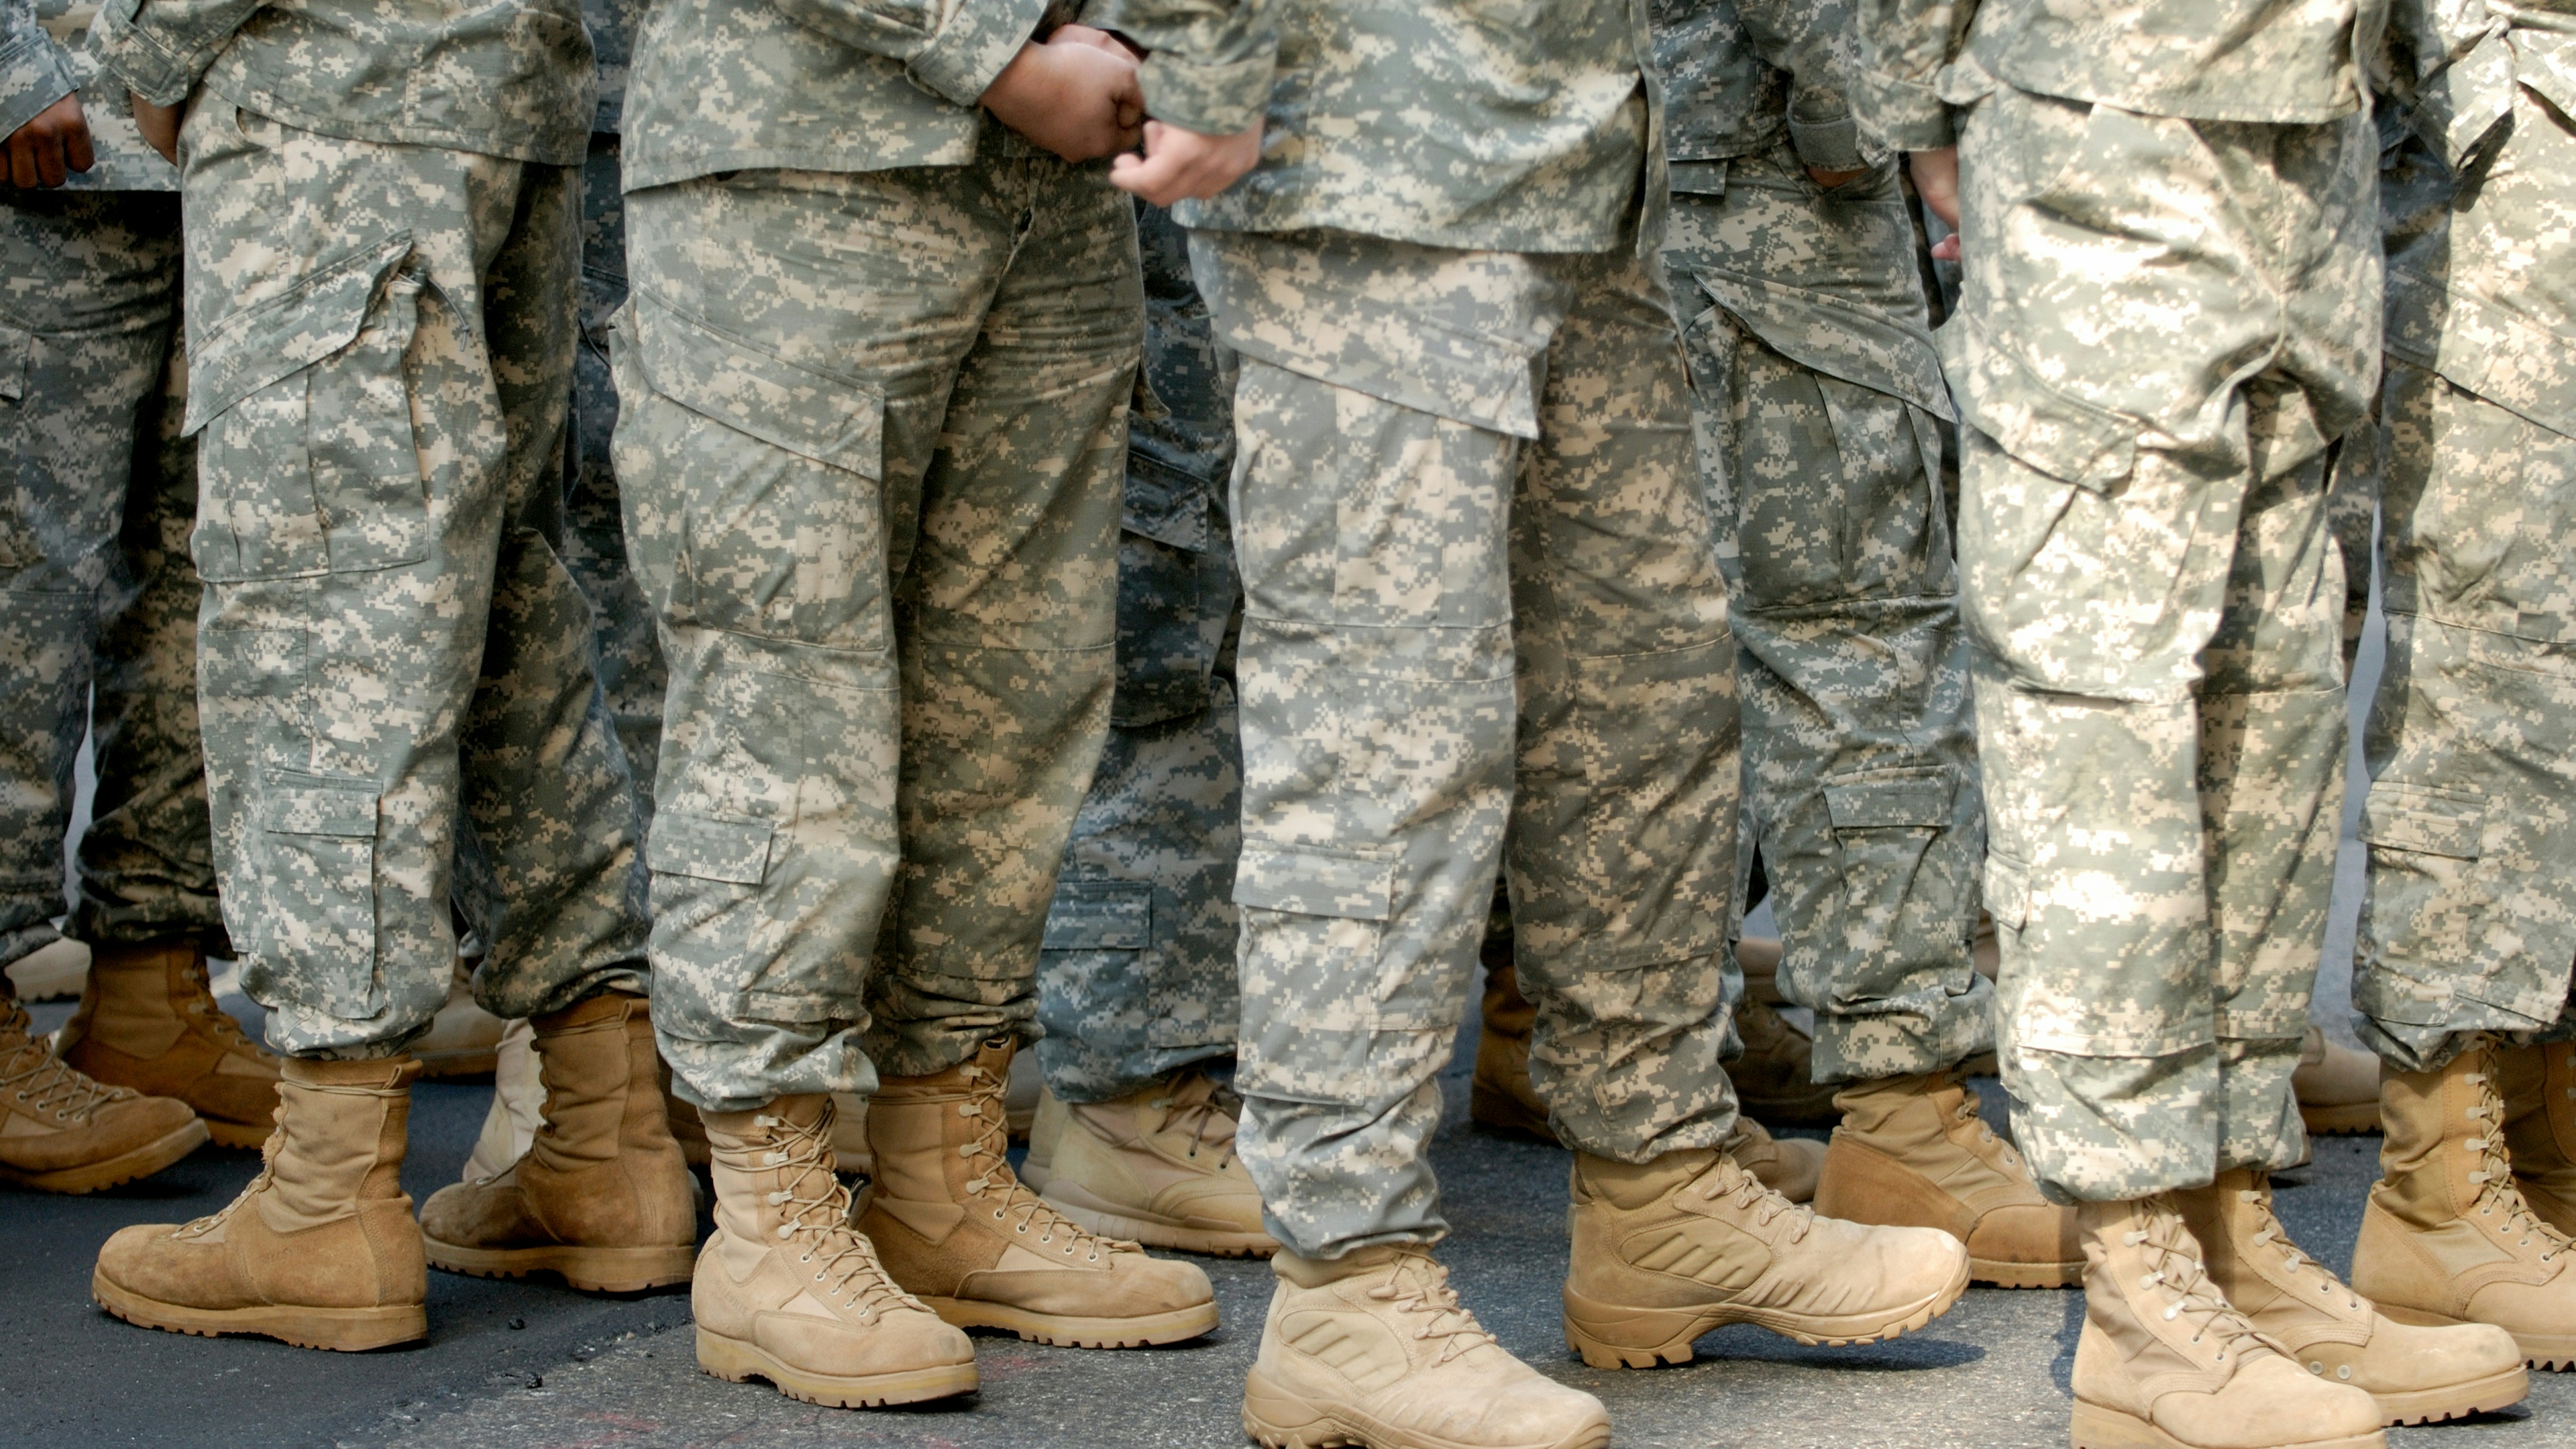 US Army soldiers in desert camouflage uniforms